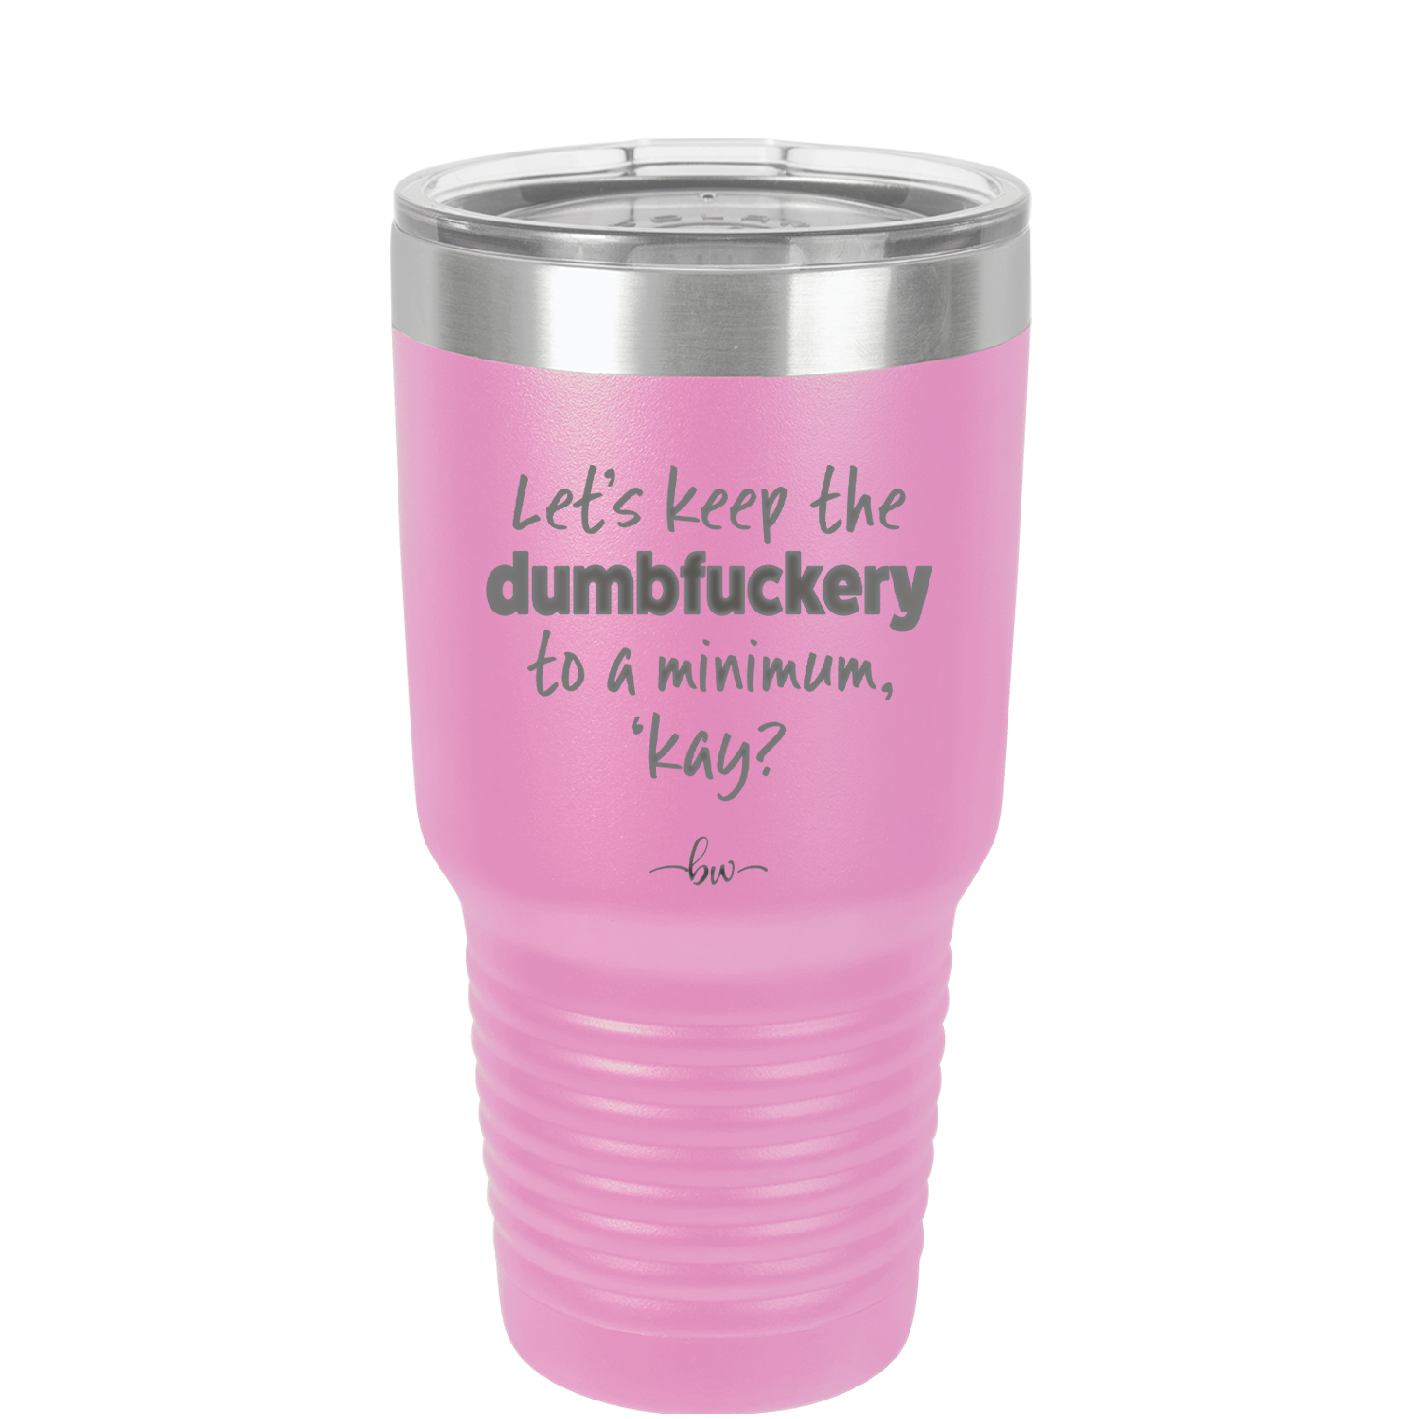 Let's Keep the Dumbfuckery to a Minimum Kay - Laser Engraved Stainless Steel Drinkware - 1719 -